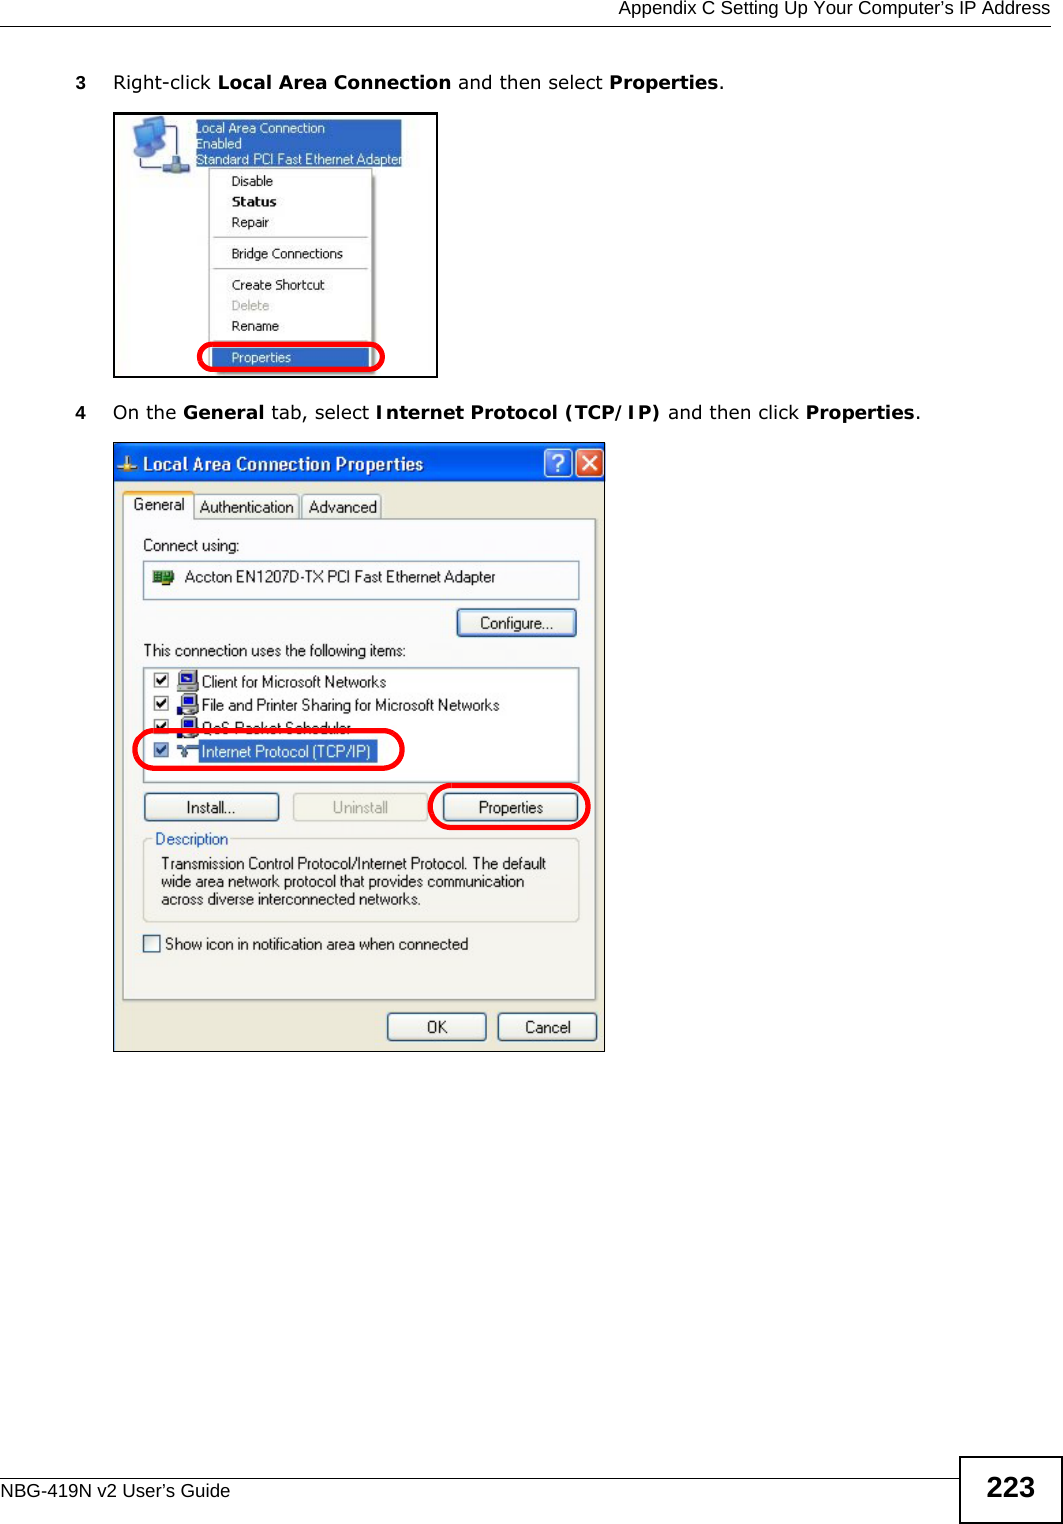  Appendix C Setting Up Your Computer’s IP AddressNBG-419N v2 User’s Guide 2233Right-click Local Area Connection and then select Properties.4On the General tab, select Internet Protocol (TCP/IP) and then click Properties.